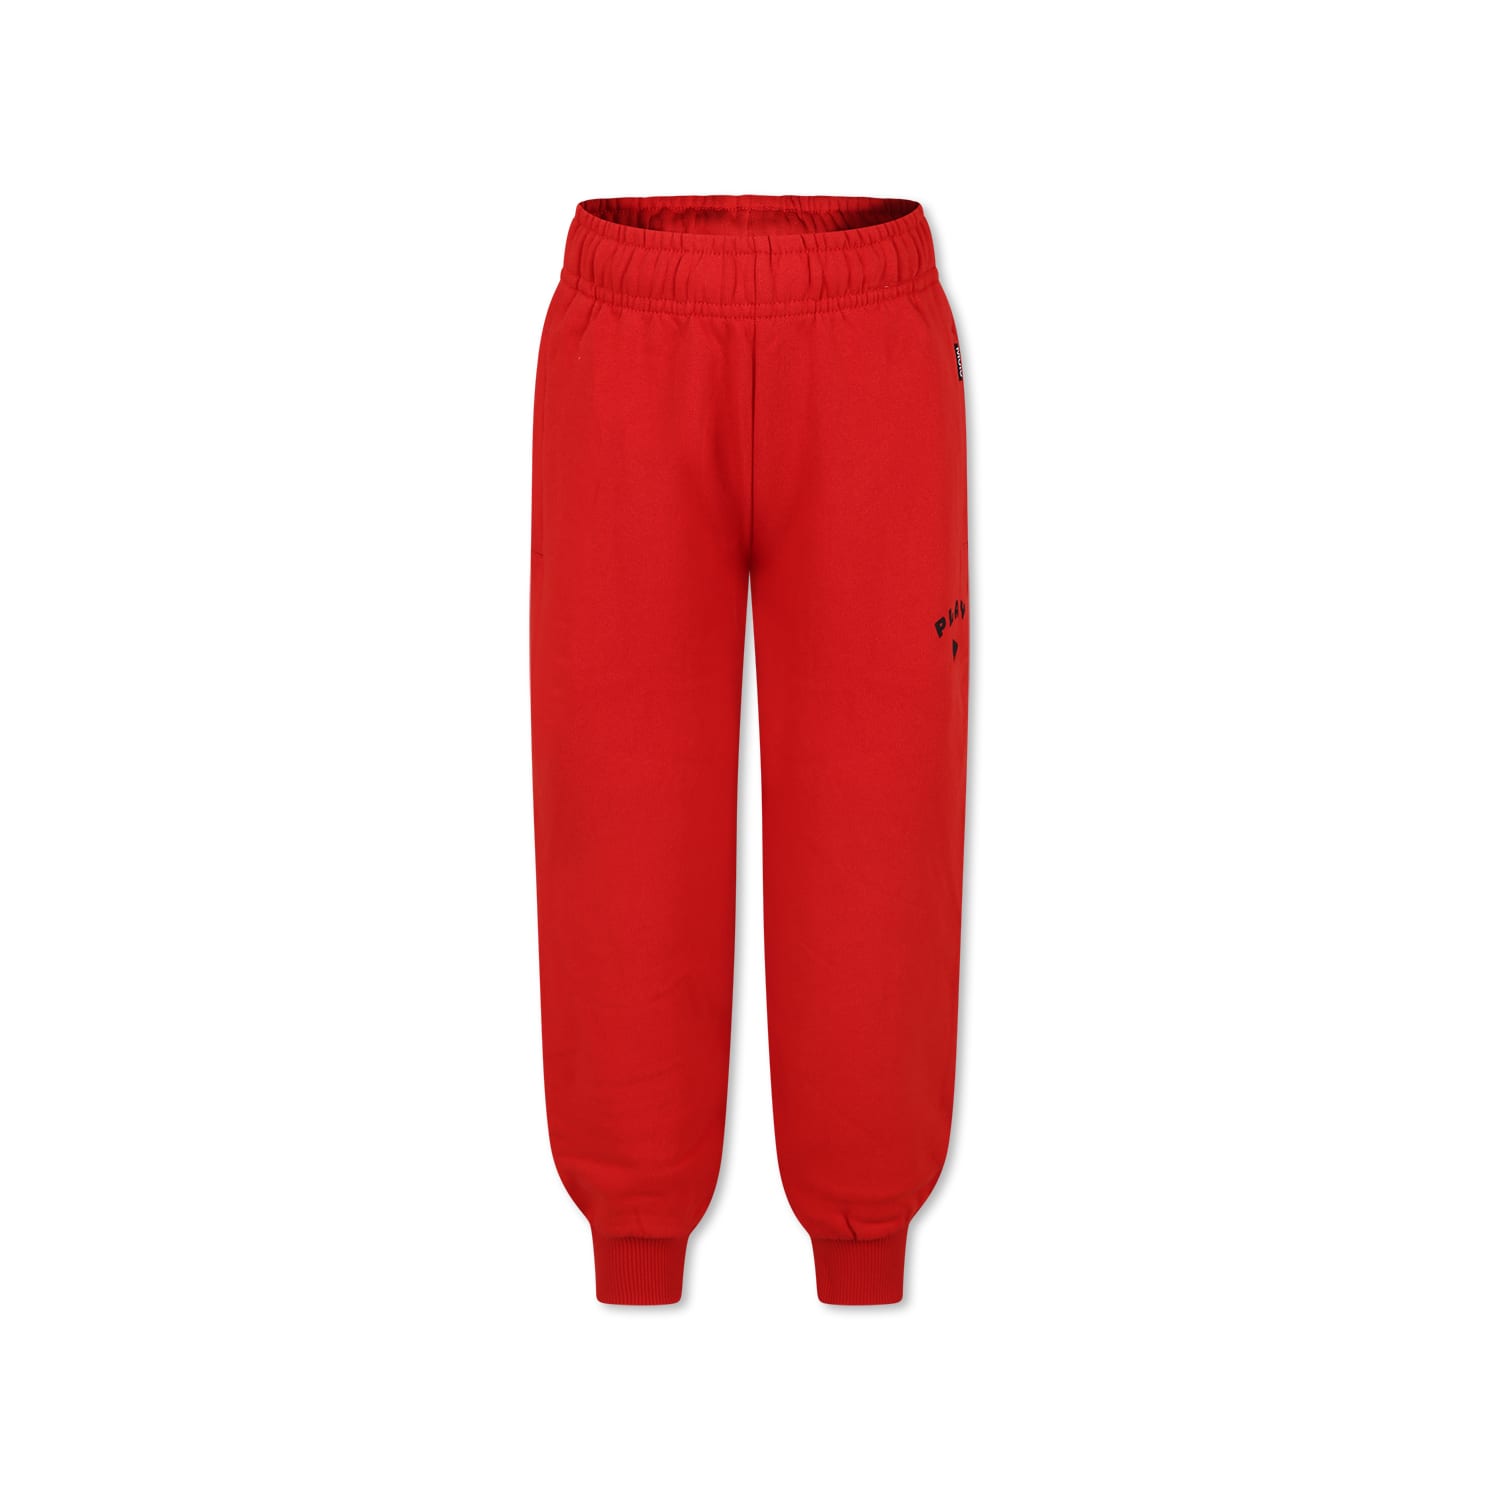 Molo Kids' Red Trousers For Boy With Writing